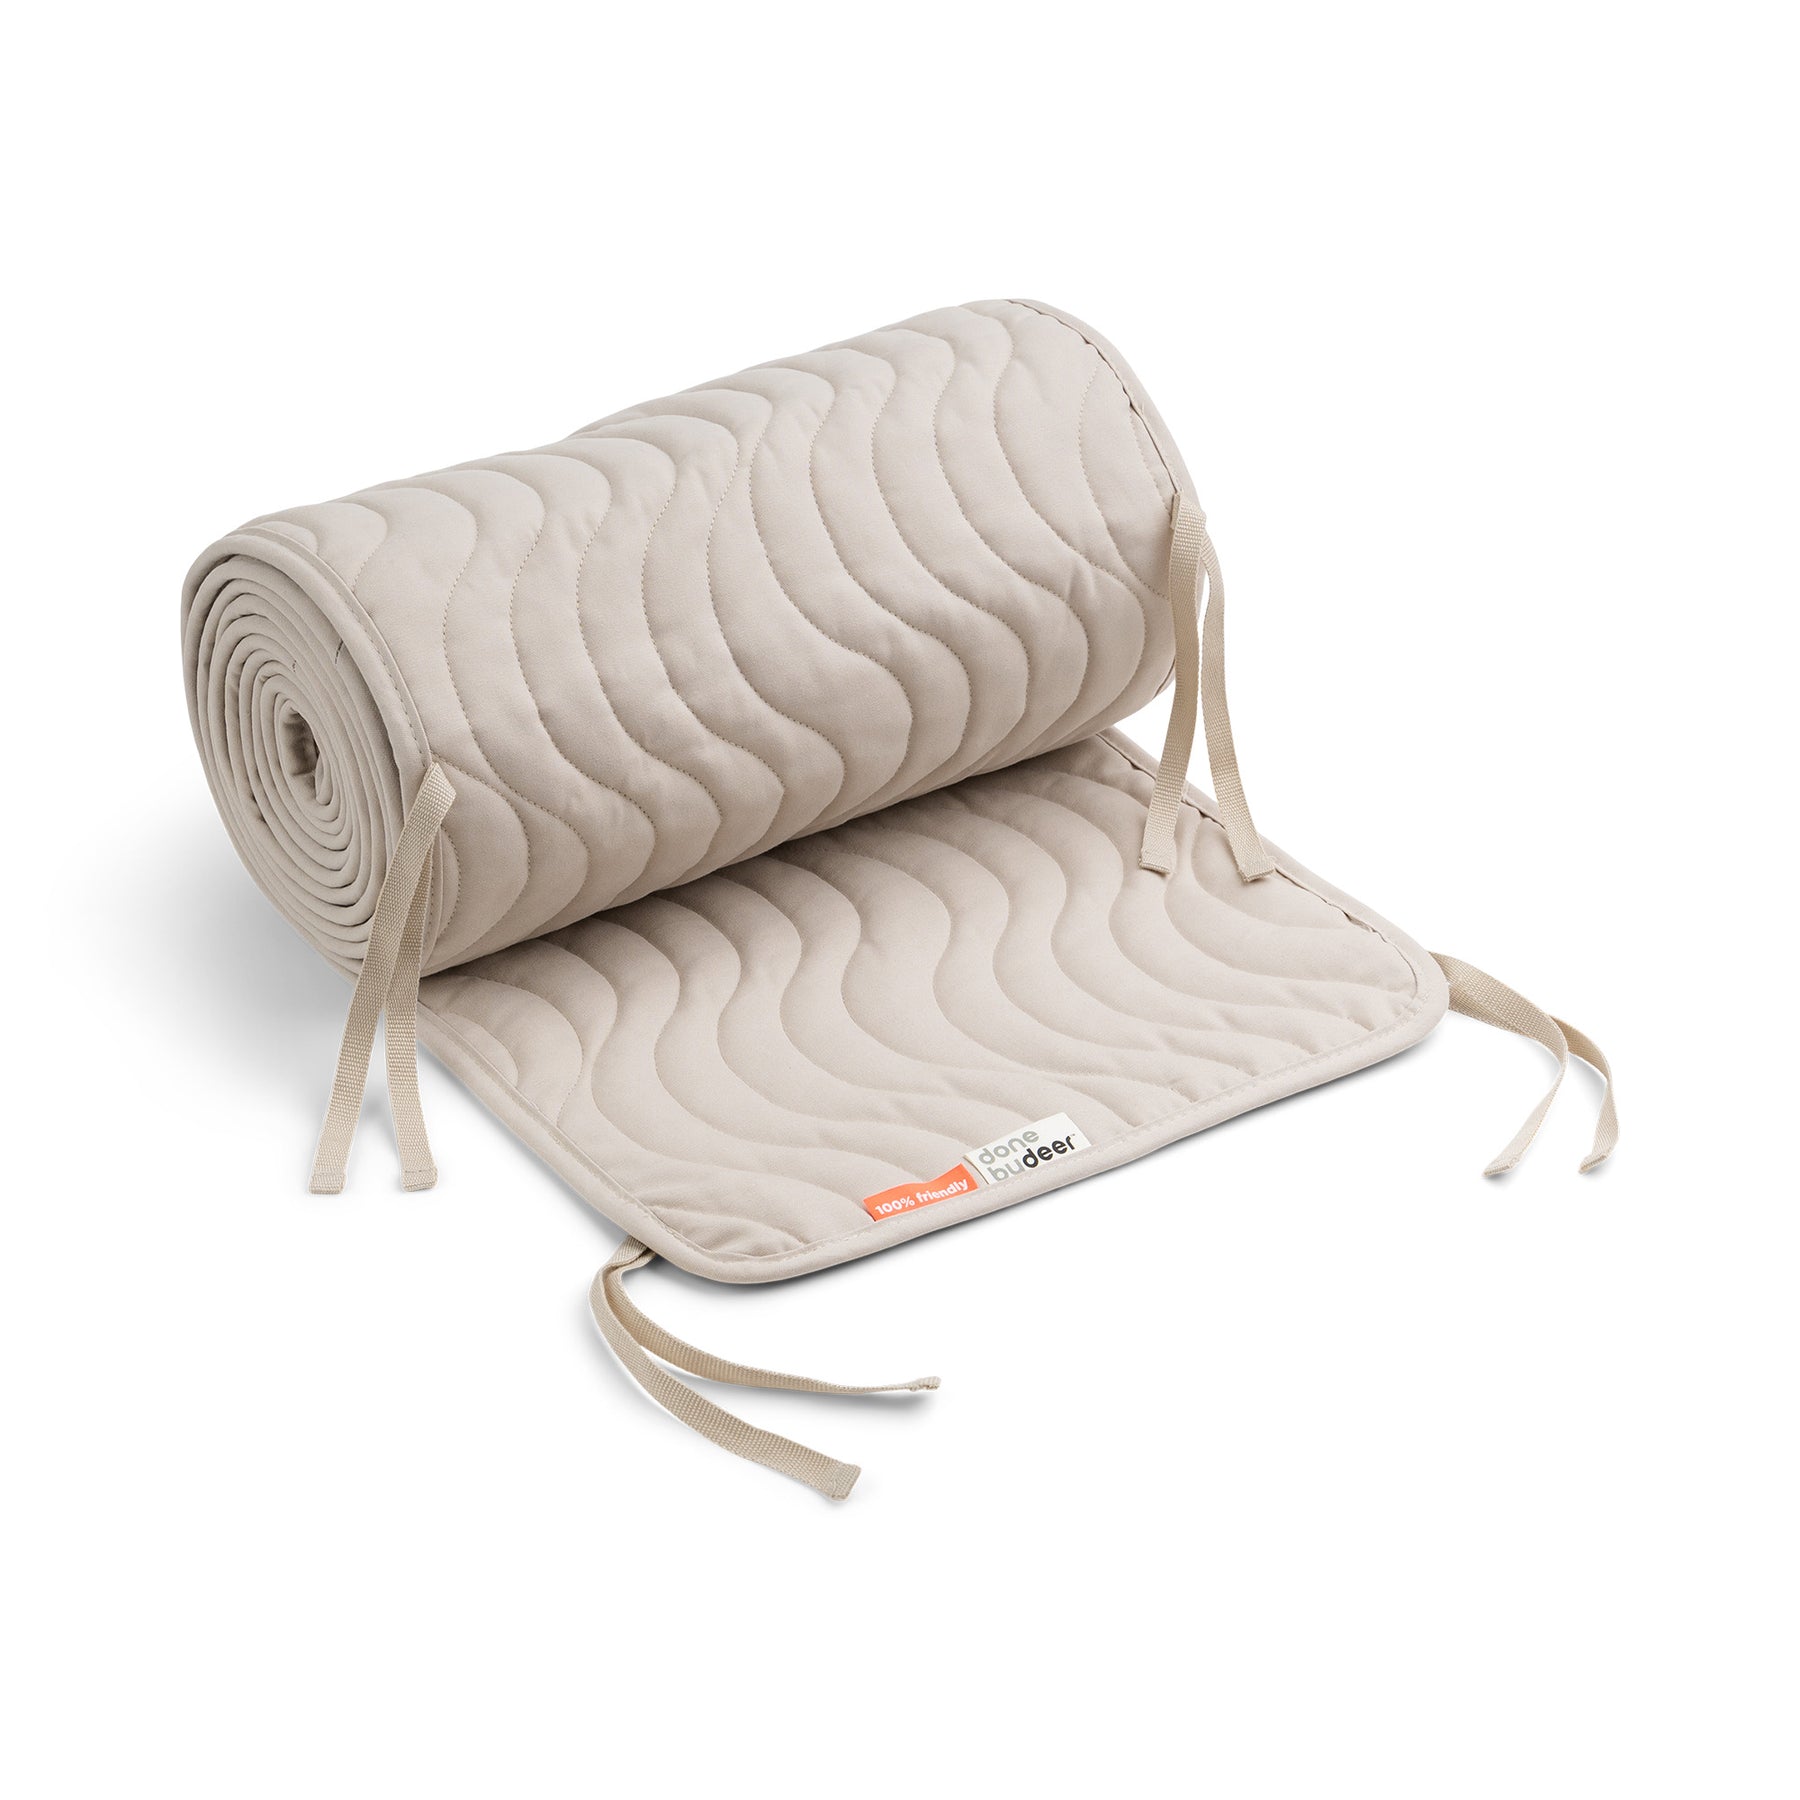 Quilted bed bumper with strings - Waves - Sand - Front